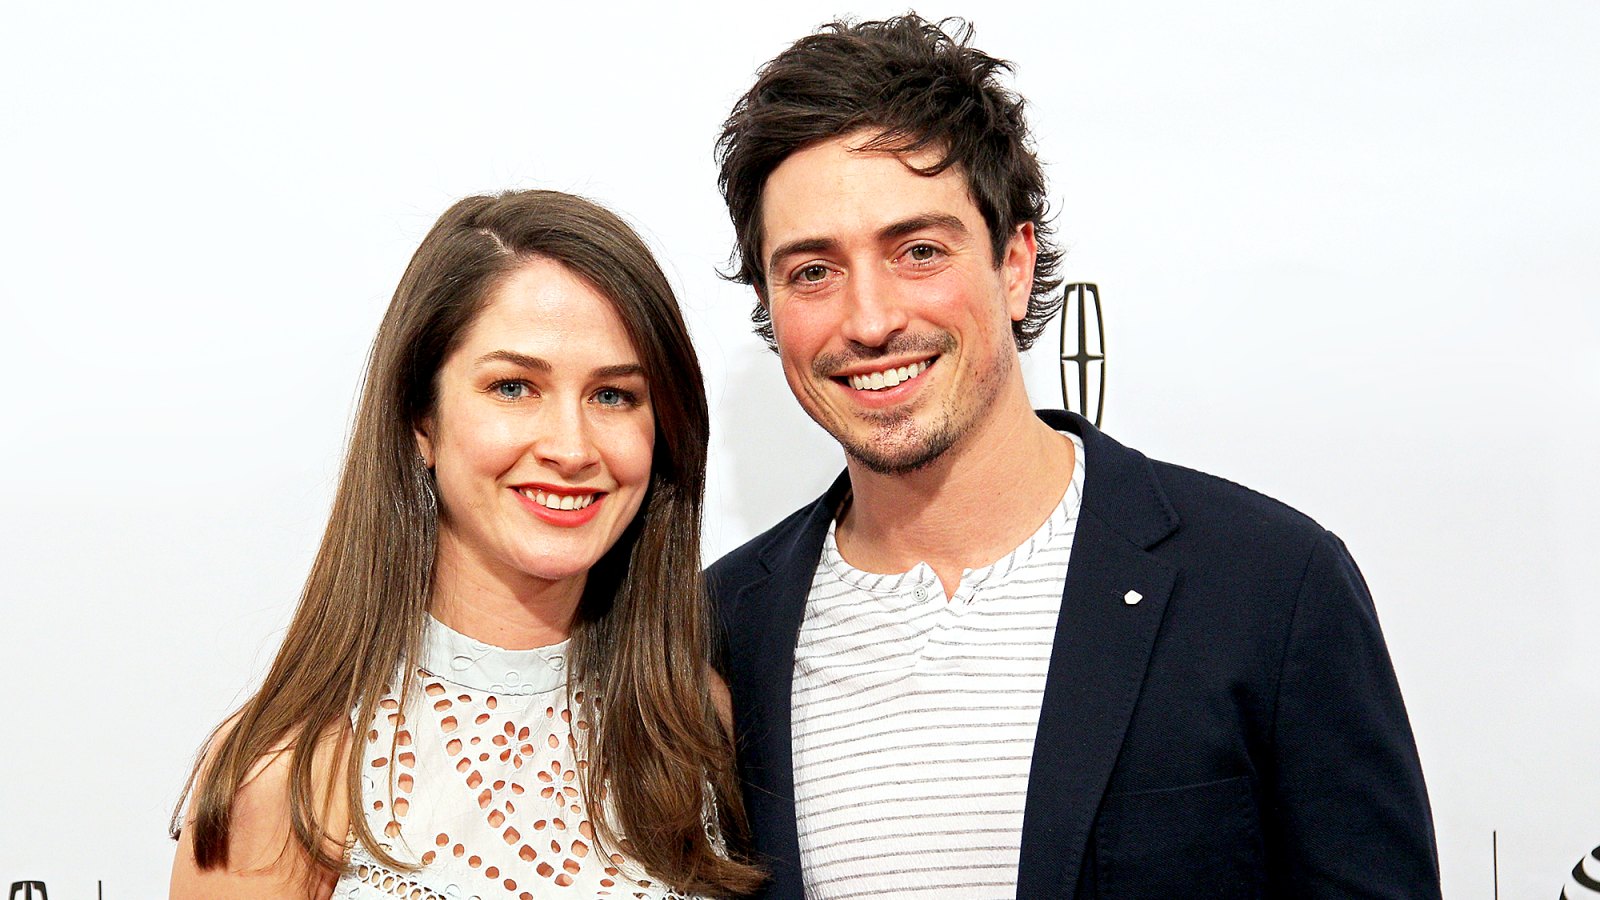 Ben Feldman and Michelle Mulitz attend the "Between Us" Premiere at SVA Theatre 1 on April 18, 2016 in New York City.